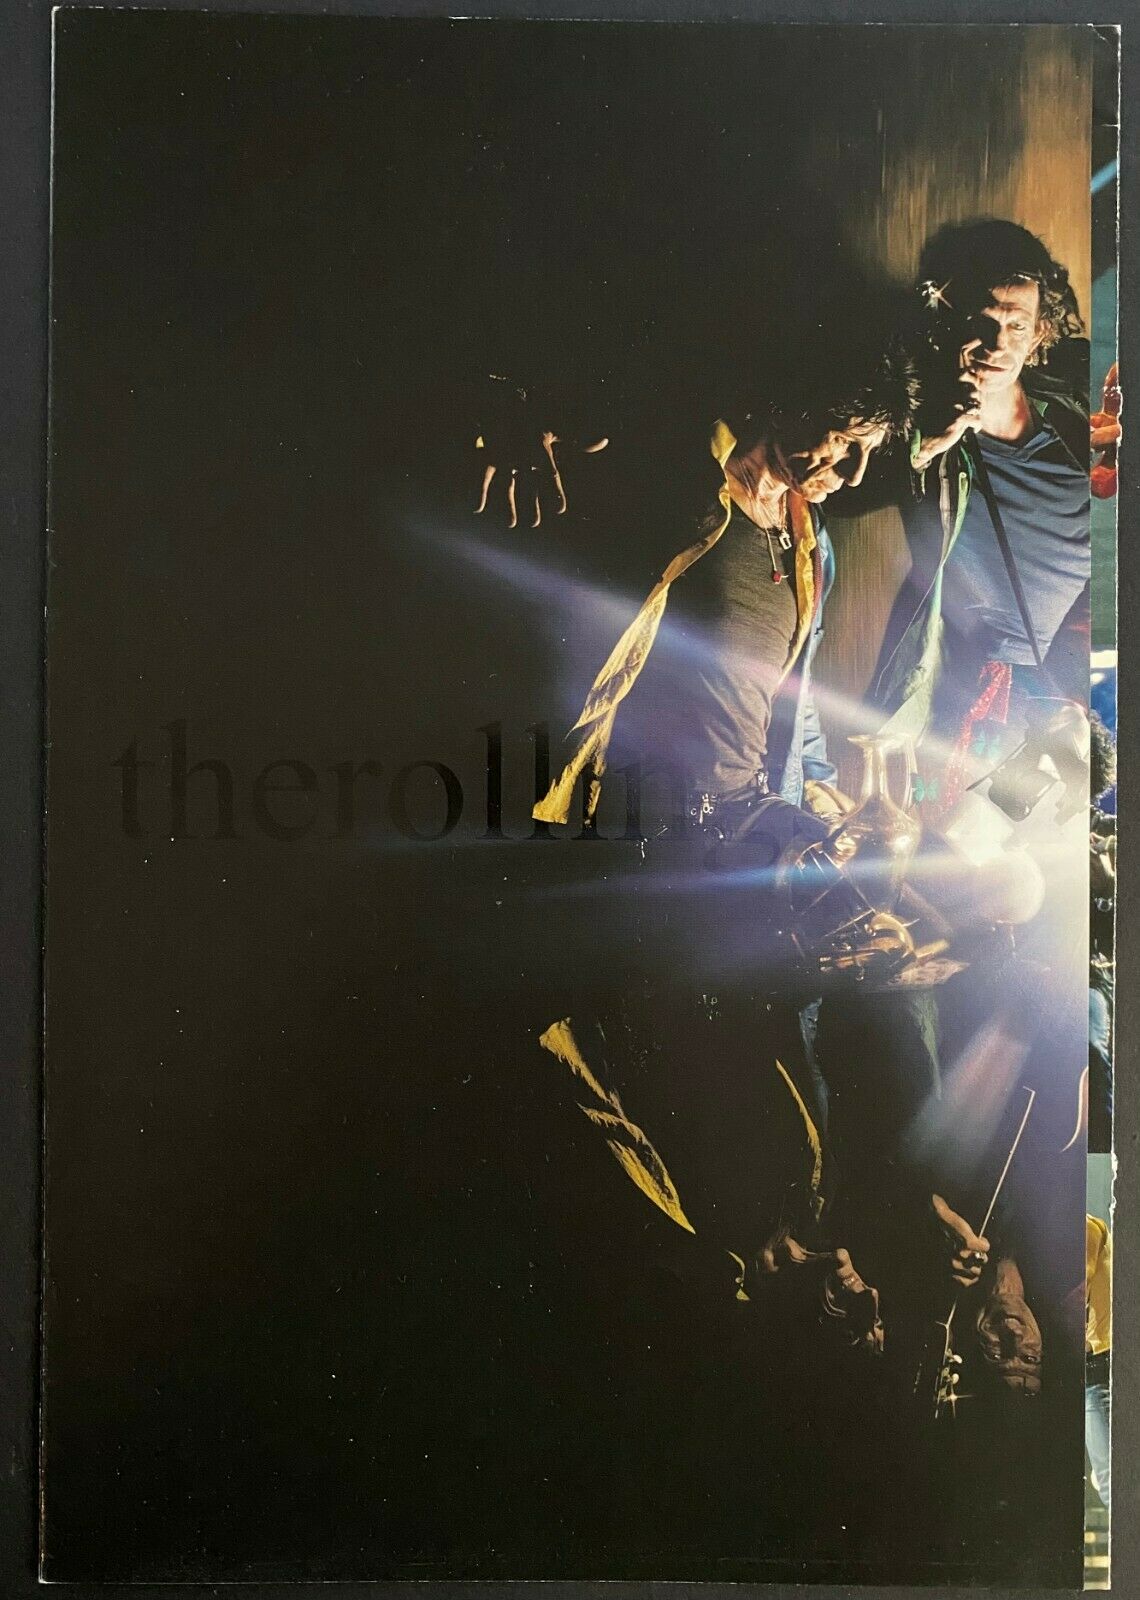 2005-2007 Rolling Stones Bigger Bang Concert Tour Poster + 4 Page Fold Out